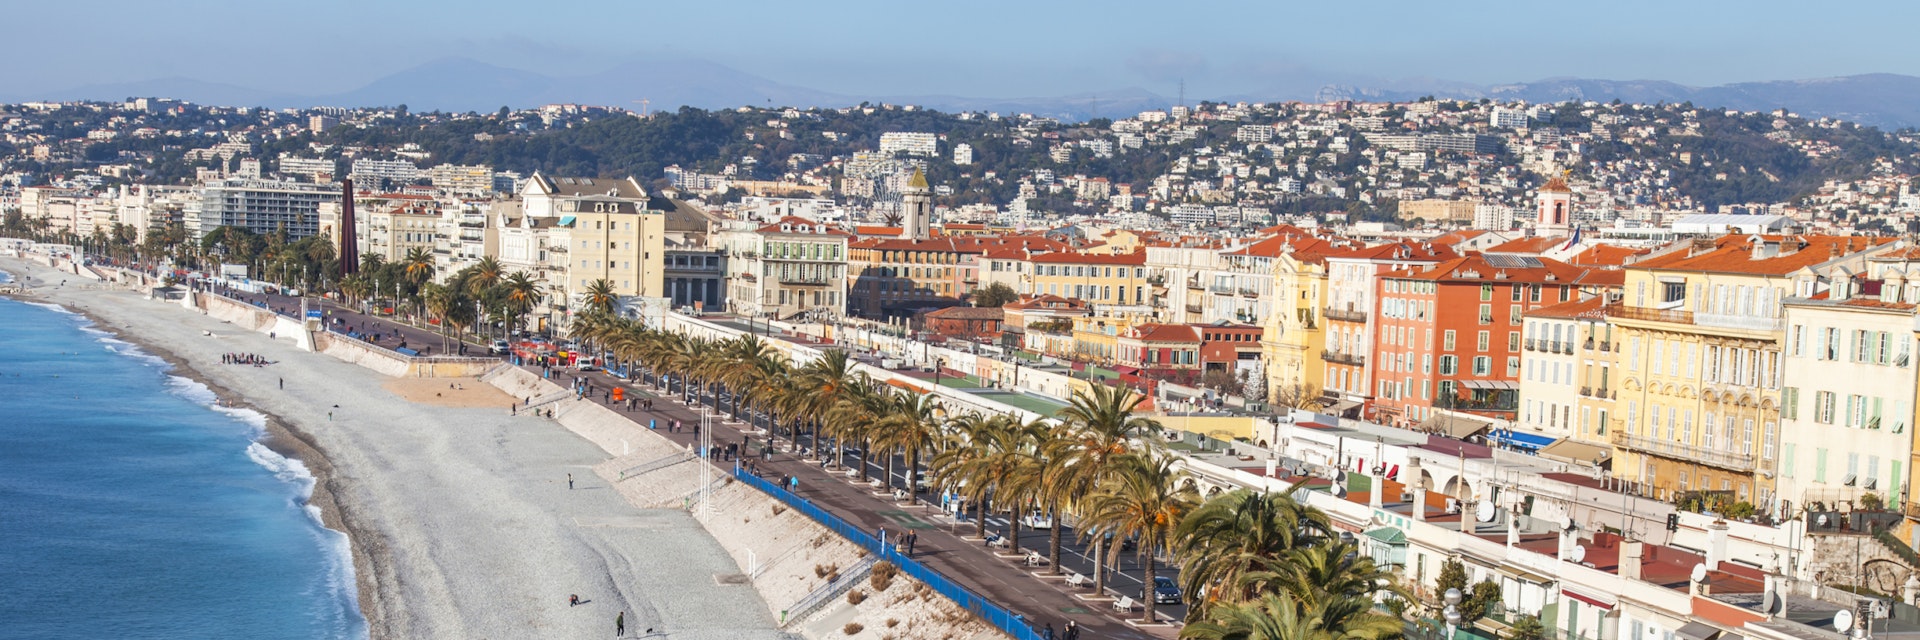 NICE, FRANCE, on JANUARY 9, 2017. Promenade des Anglais - the main embankment of the city, one of the most beautiful in the world, stretches along the sea and the beach. Aerial view from Shatto's hill; Shutterstock ID 613405820; Your name (First / Last): Daniel Fahey; GL account no.: 65050; Netsuite department name: Online Editorial; Full Product or Project name including edition: Nice and Graz POIs